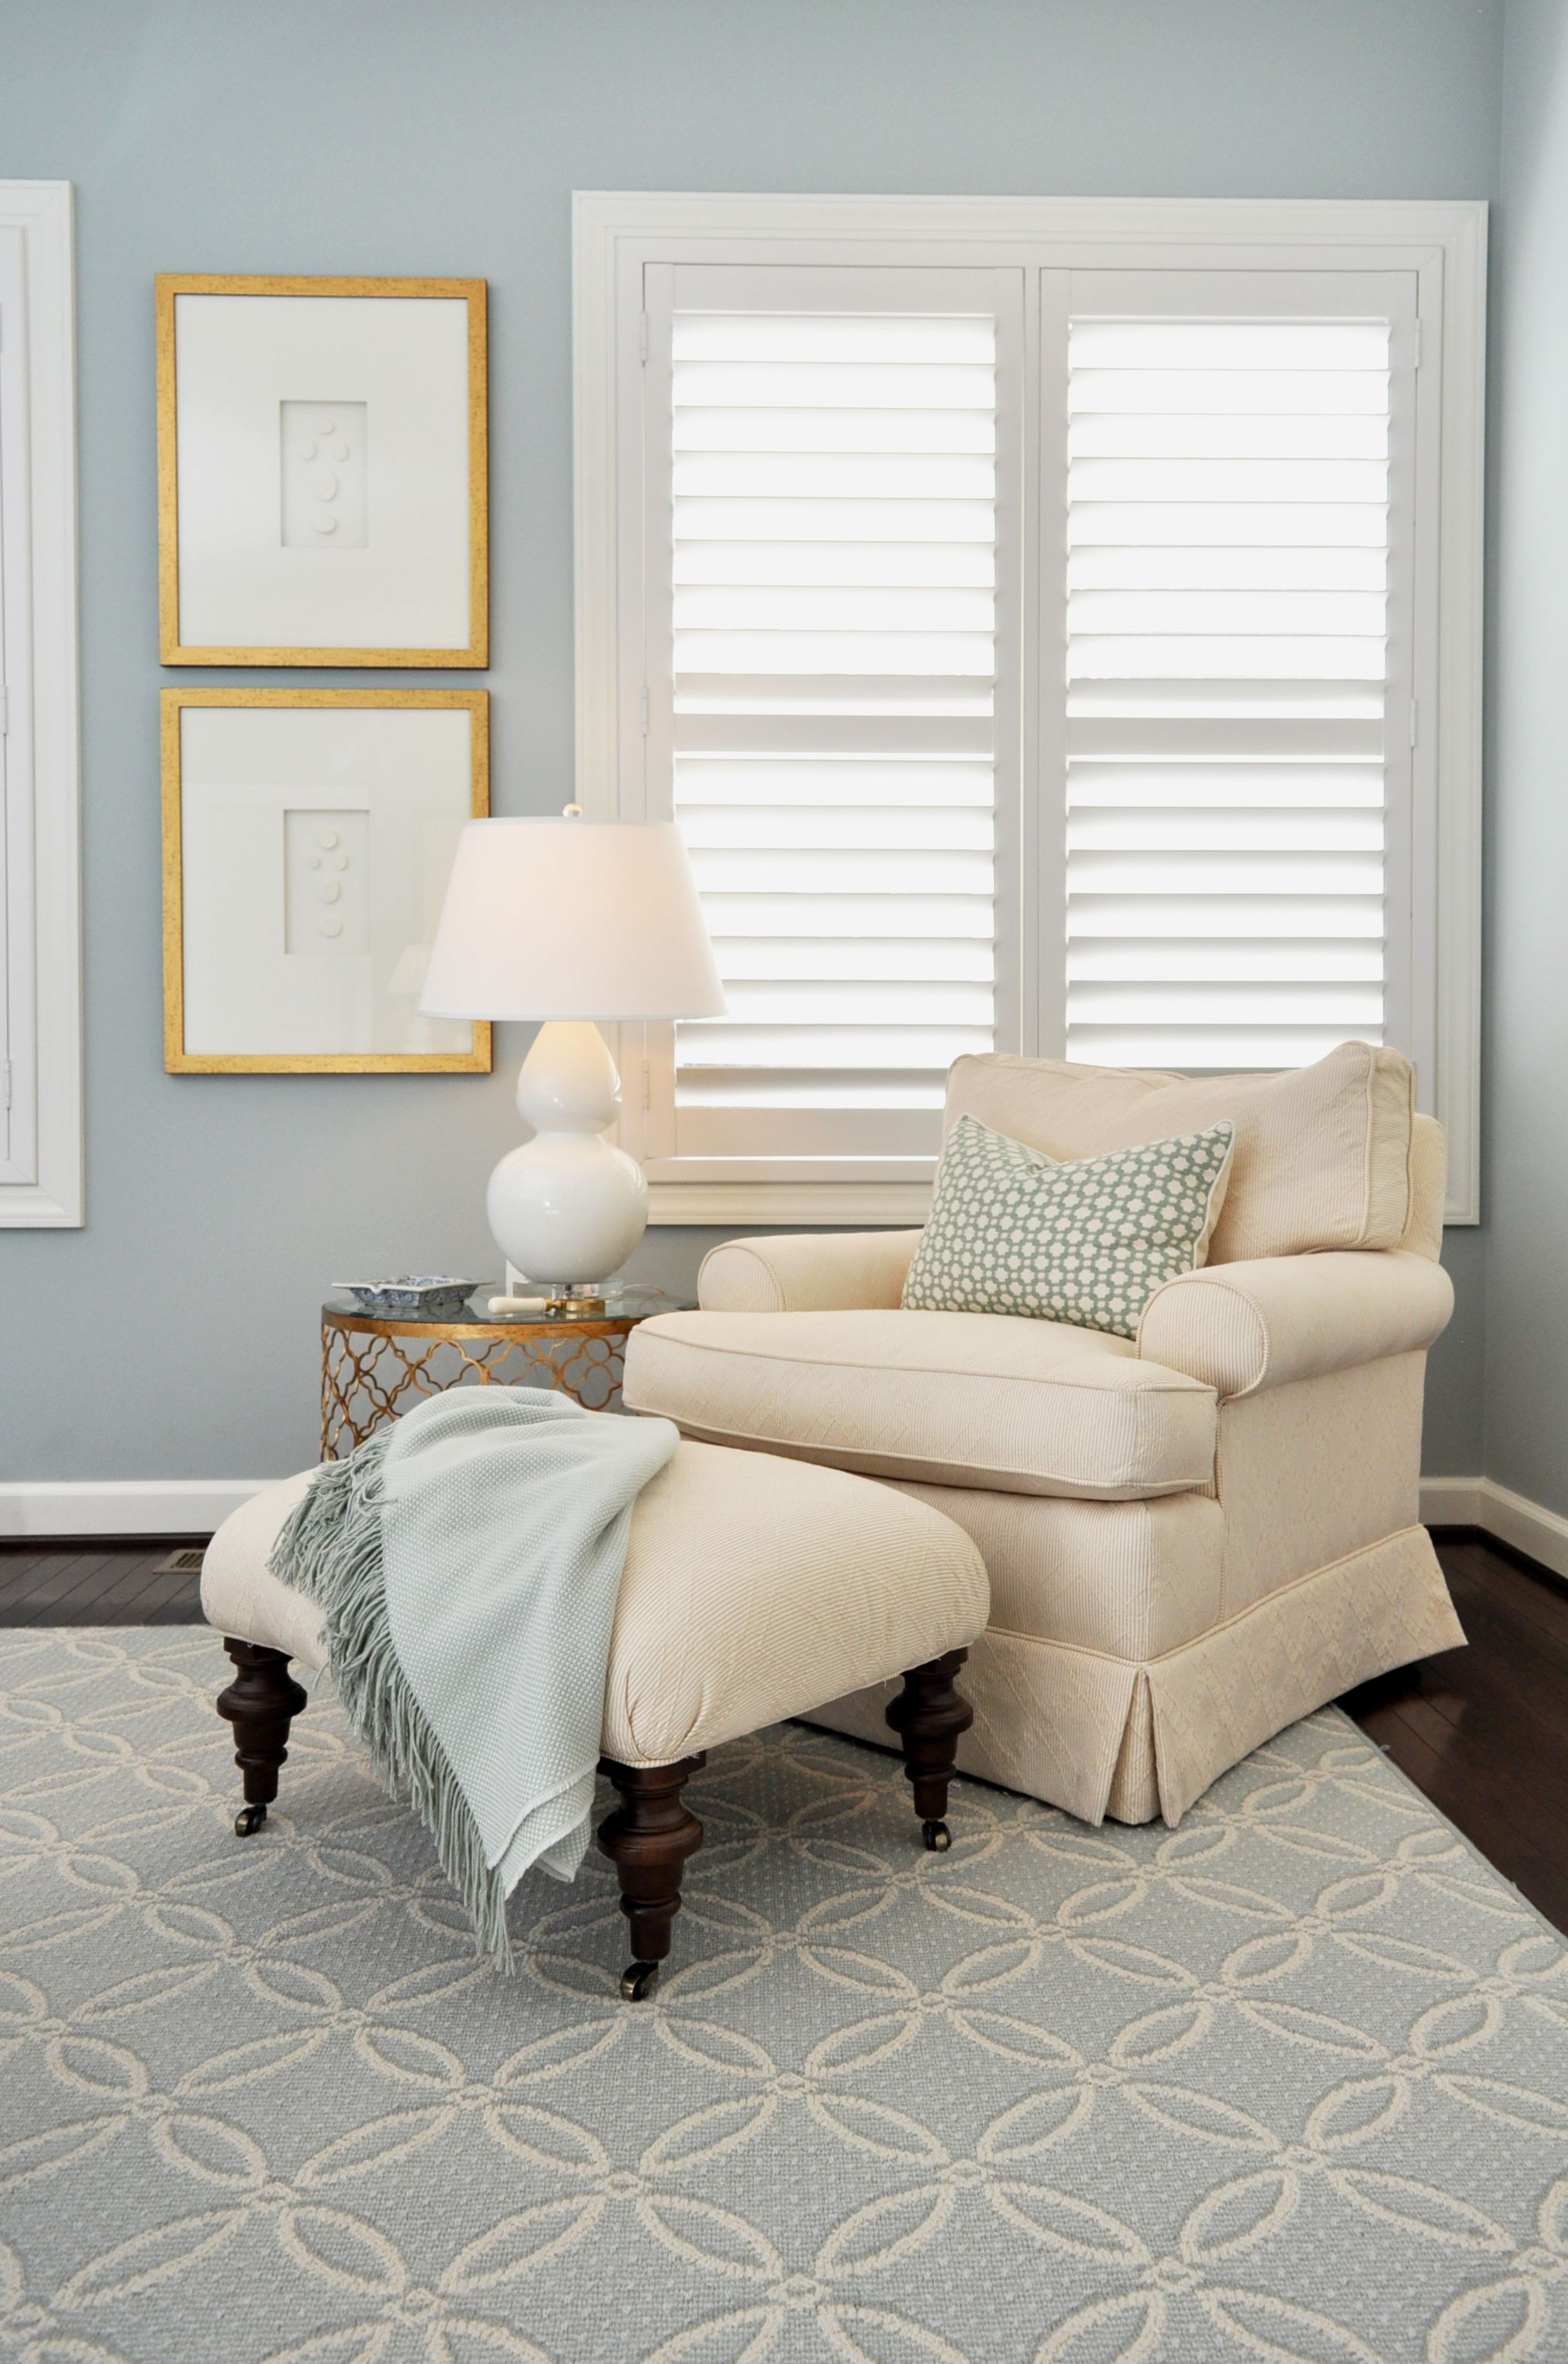 A Ba Blue White And Cream Color Scheme In A Corner Of A Bedroom regarding size 2026 X 3054